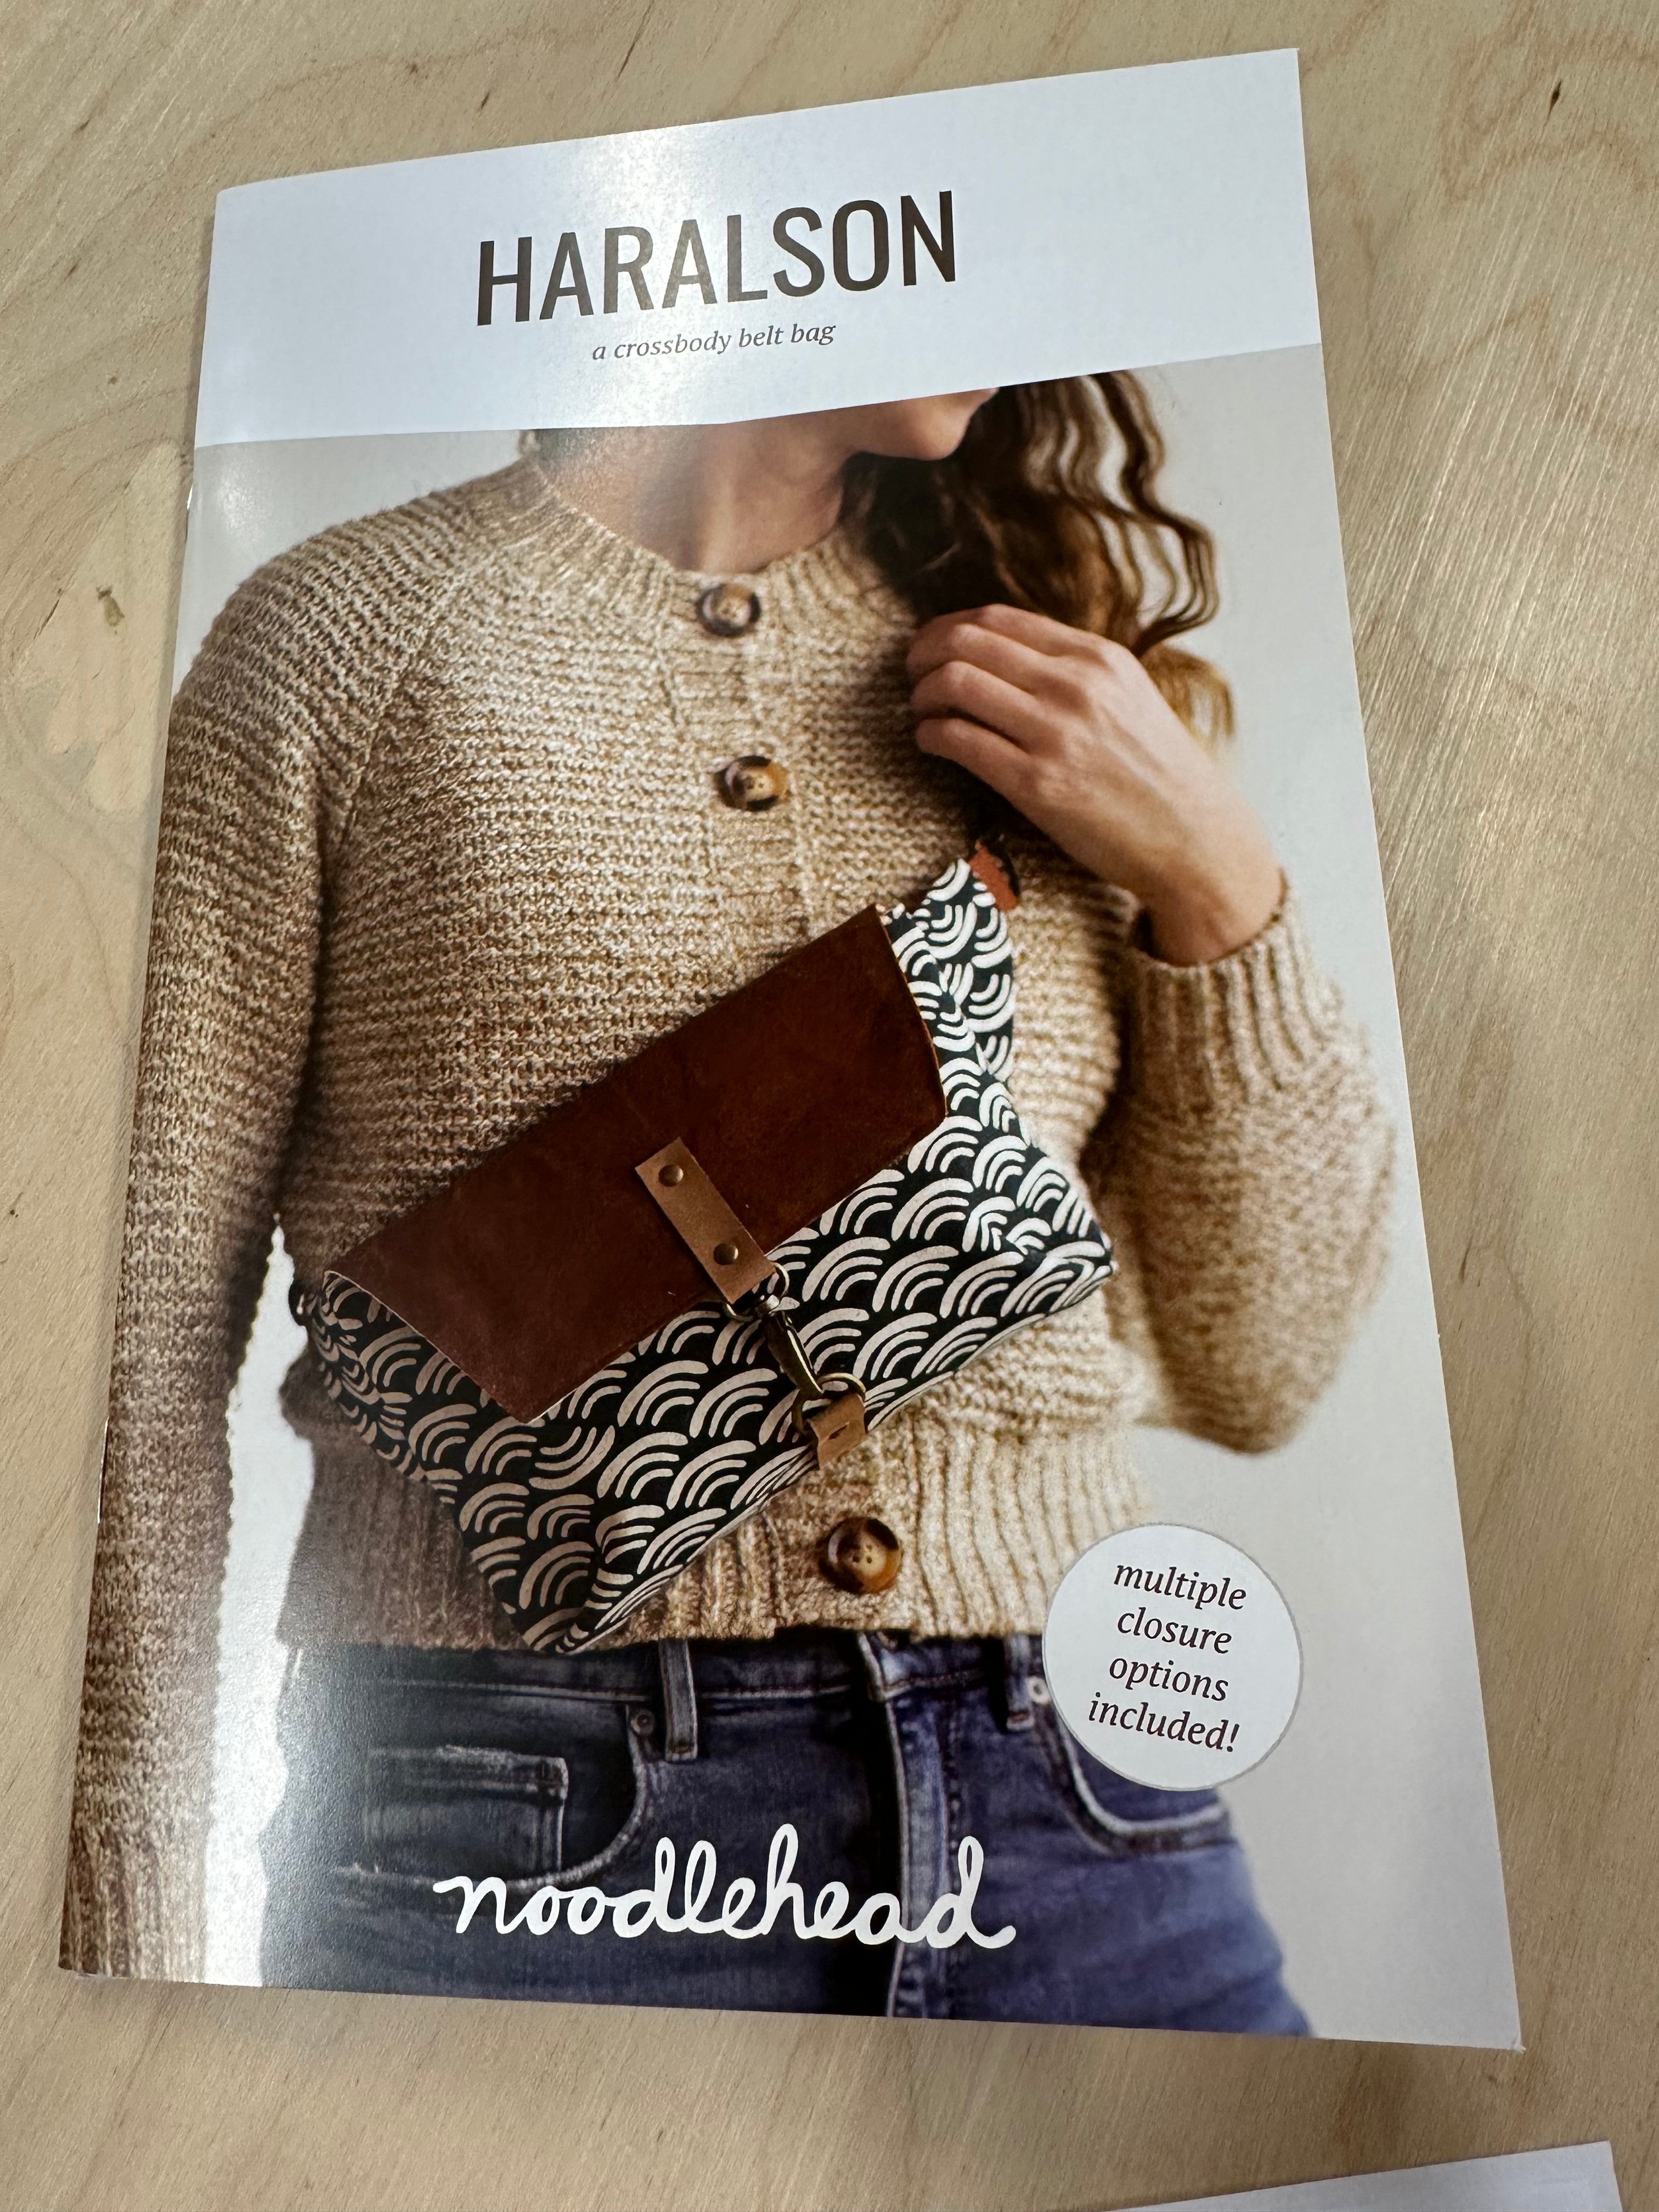 Noodlehead Haralson Sewing Pattern